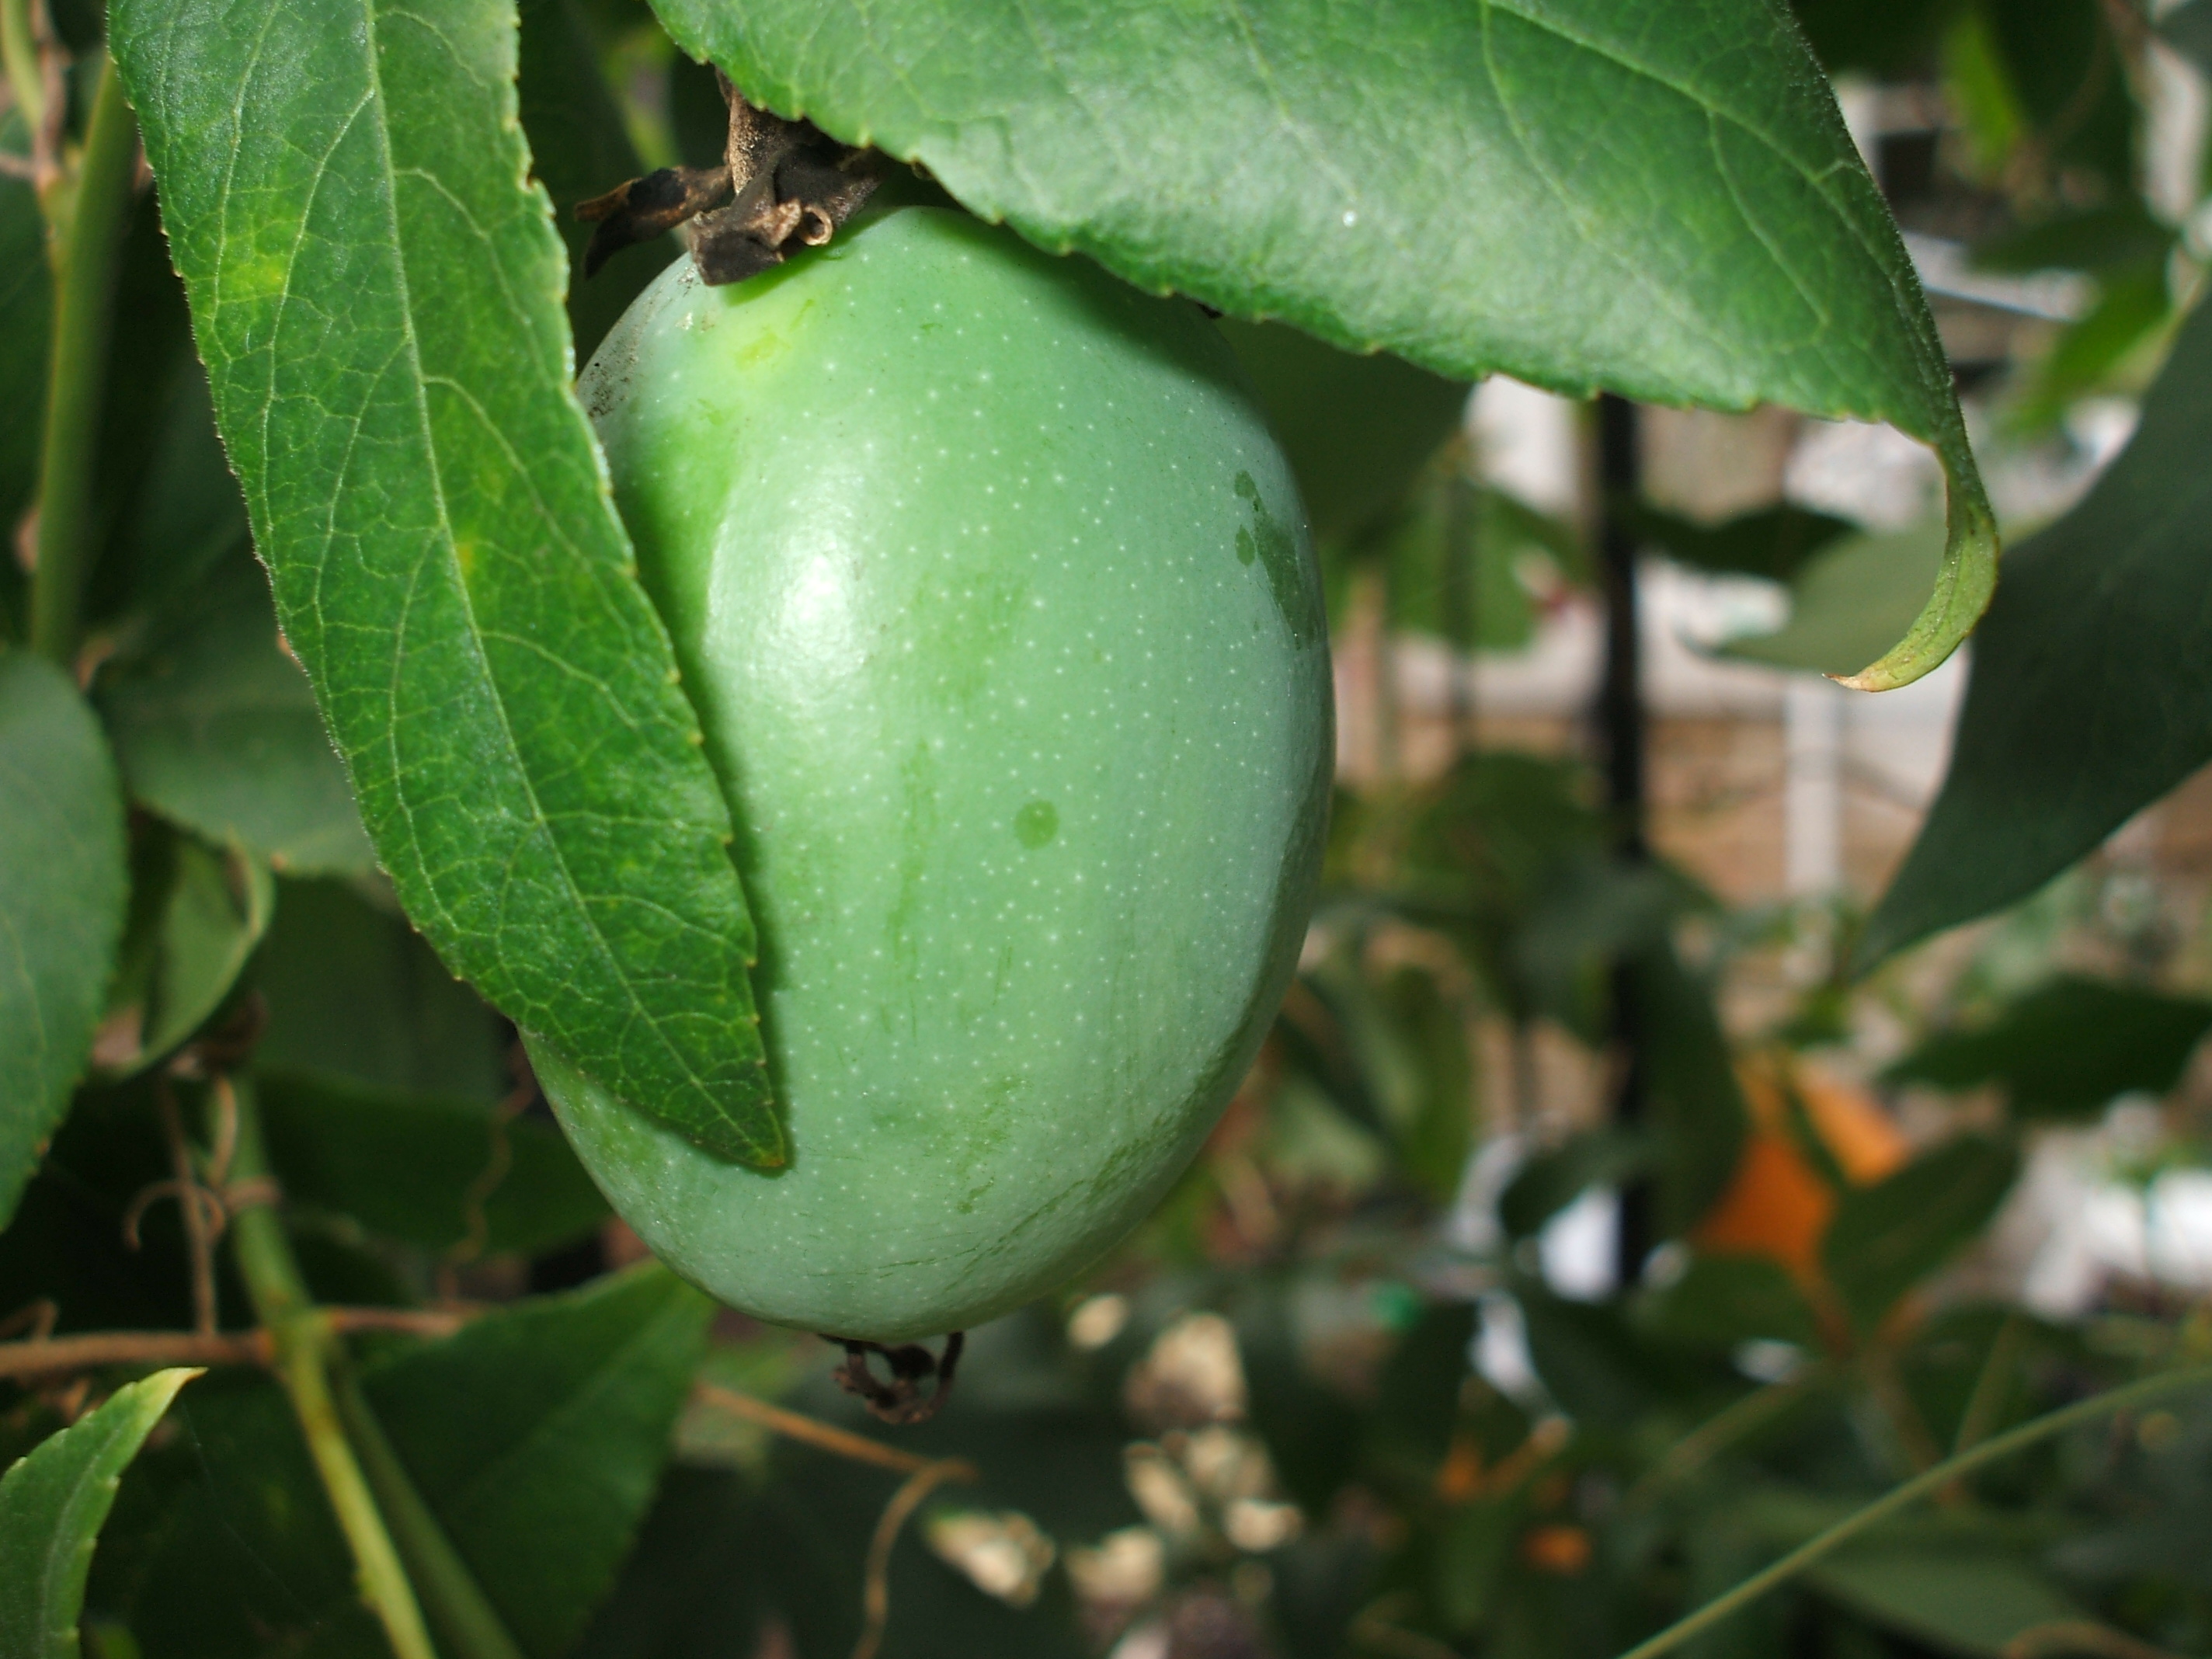 File:One green passionfruit on branch.jpg - Wikimedia Commons